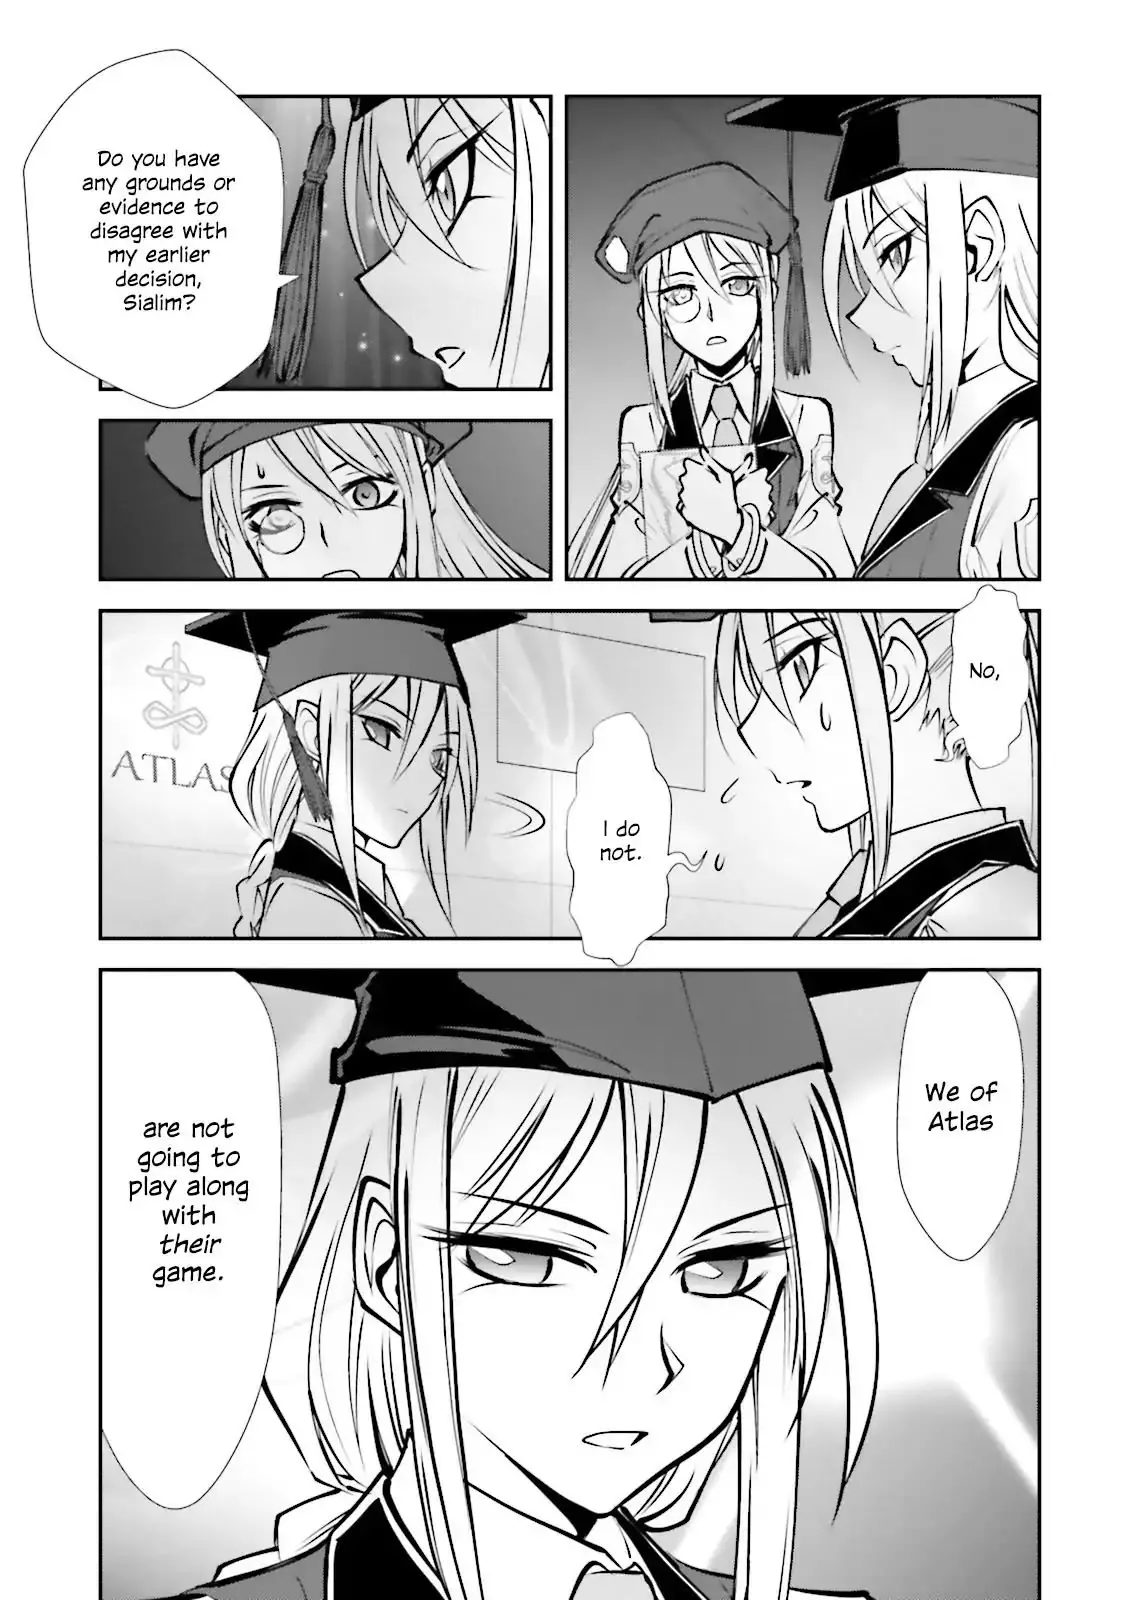 Melty Blood - Back Alley Alliance Nightmare - 3 page 9